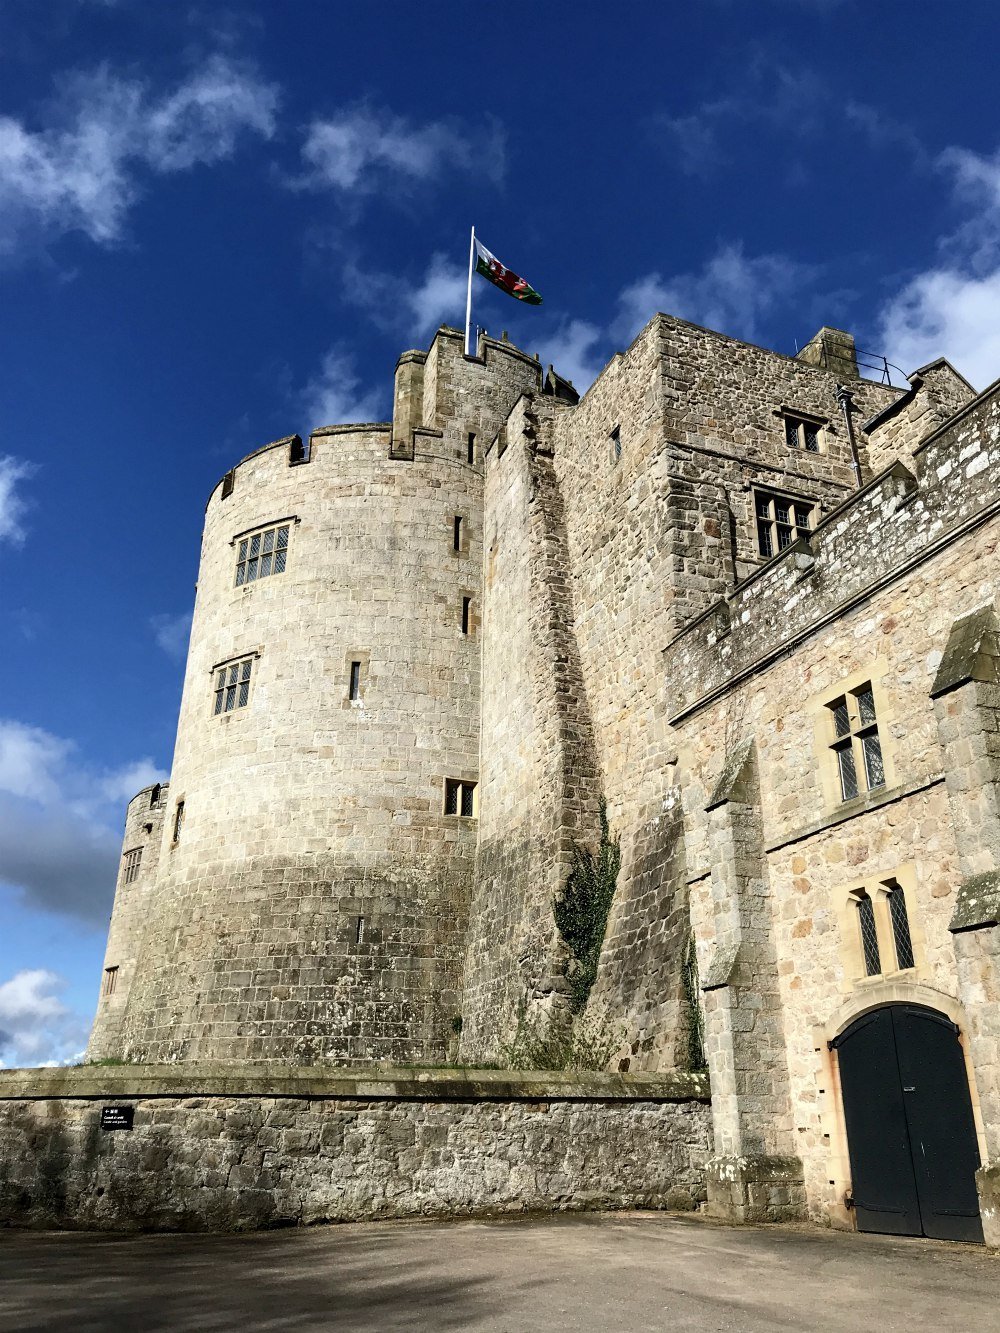 Chirk Castle in North East Wales - things to do in North East Wales Photo Heatheronhertravels.com